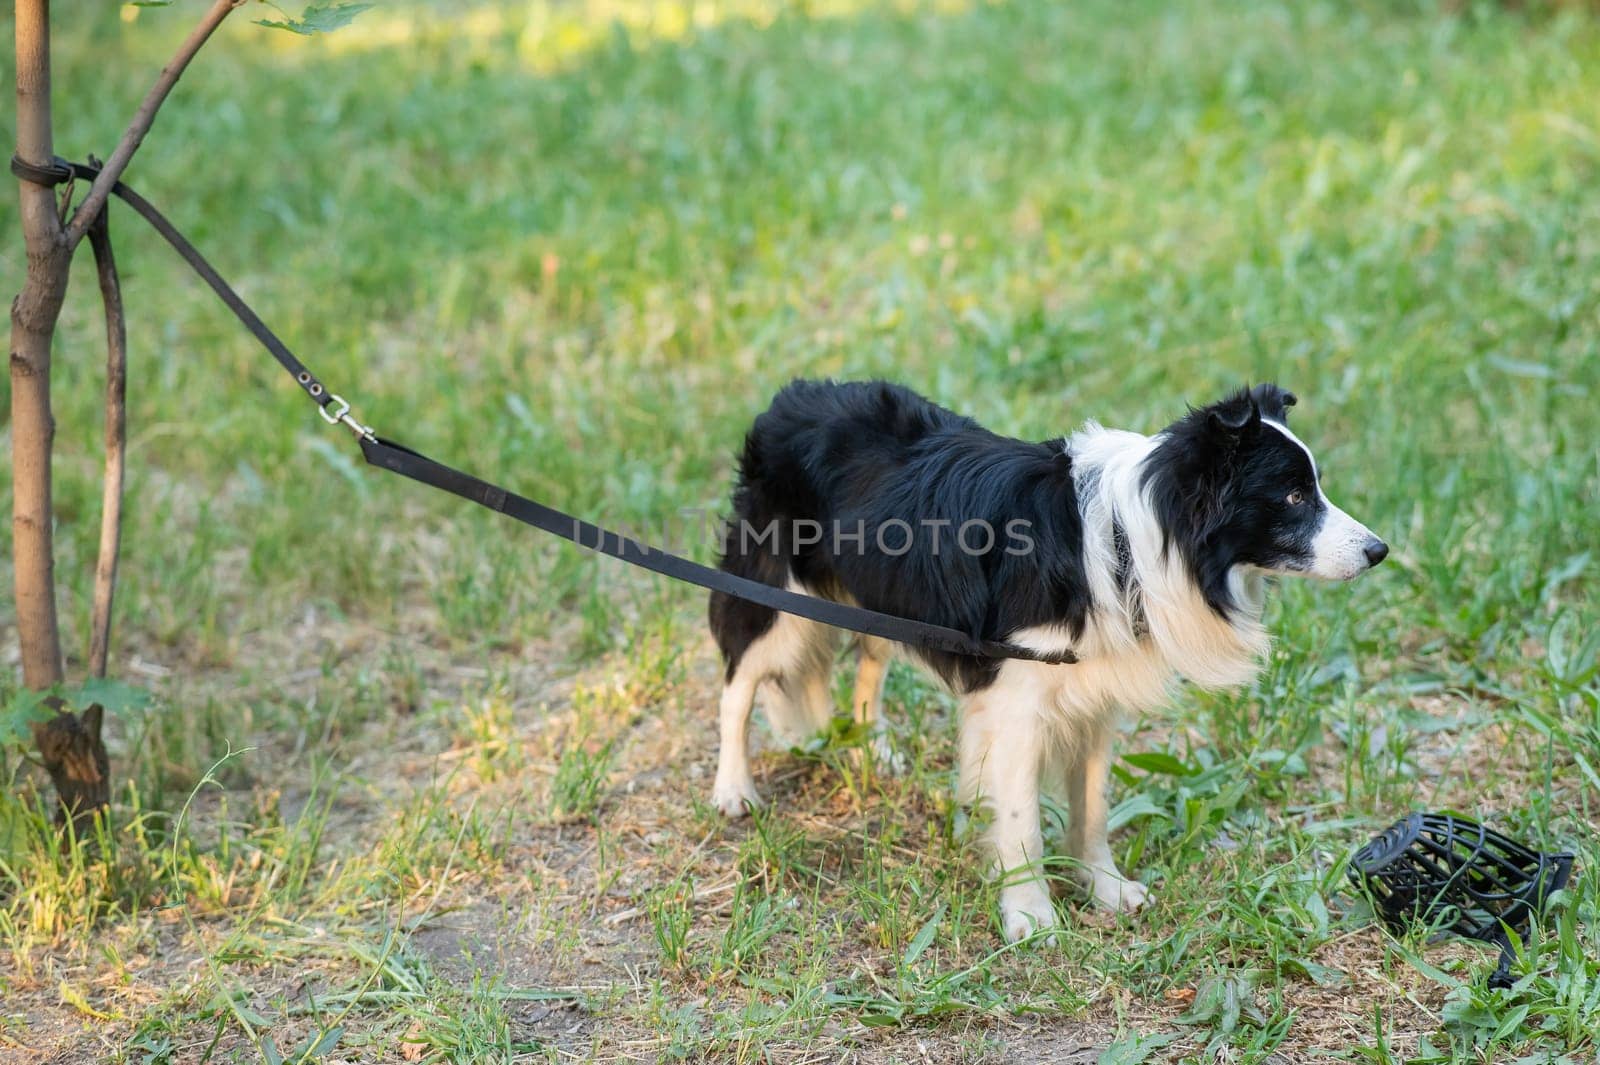 Black and white border collie tied by a leash to a tree